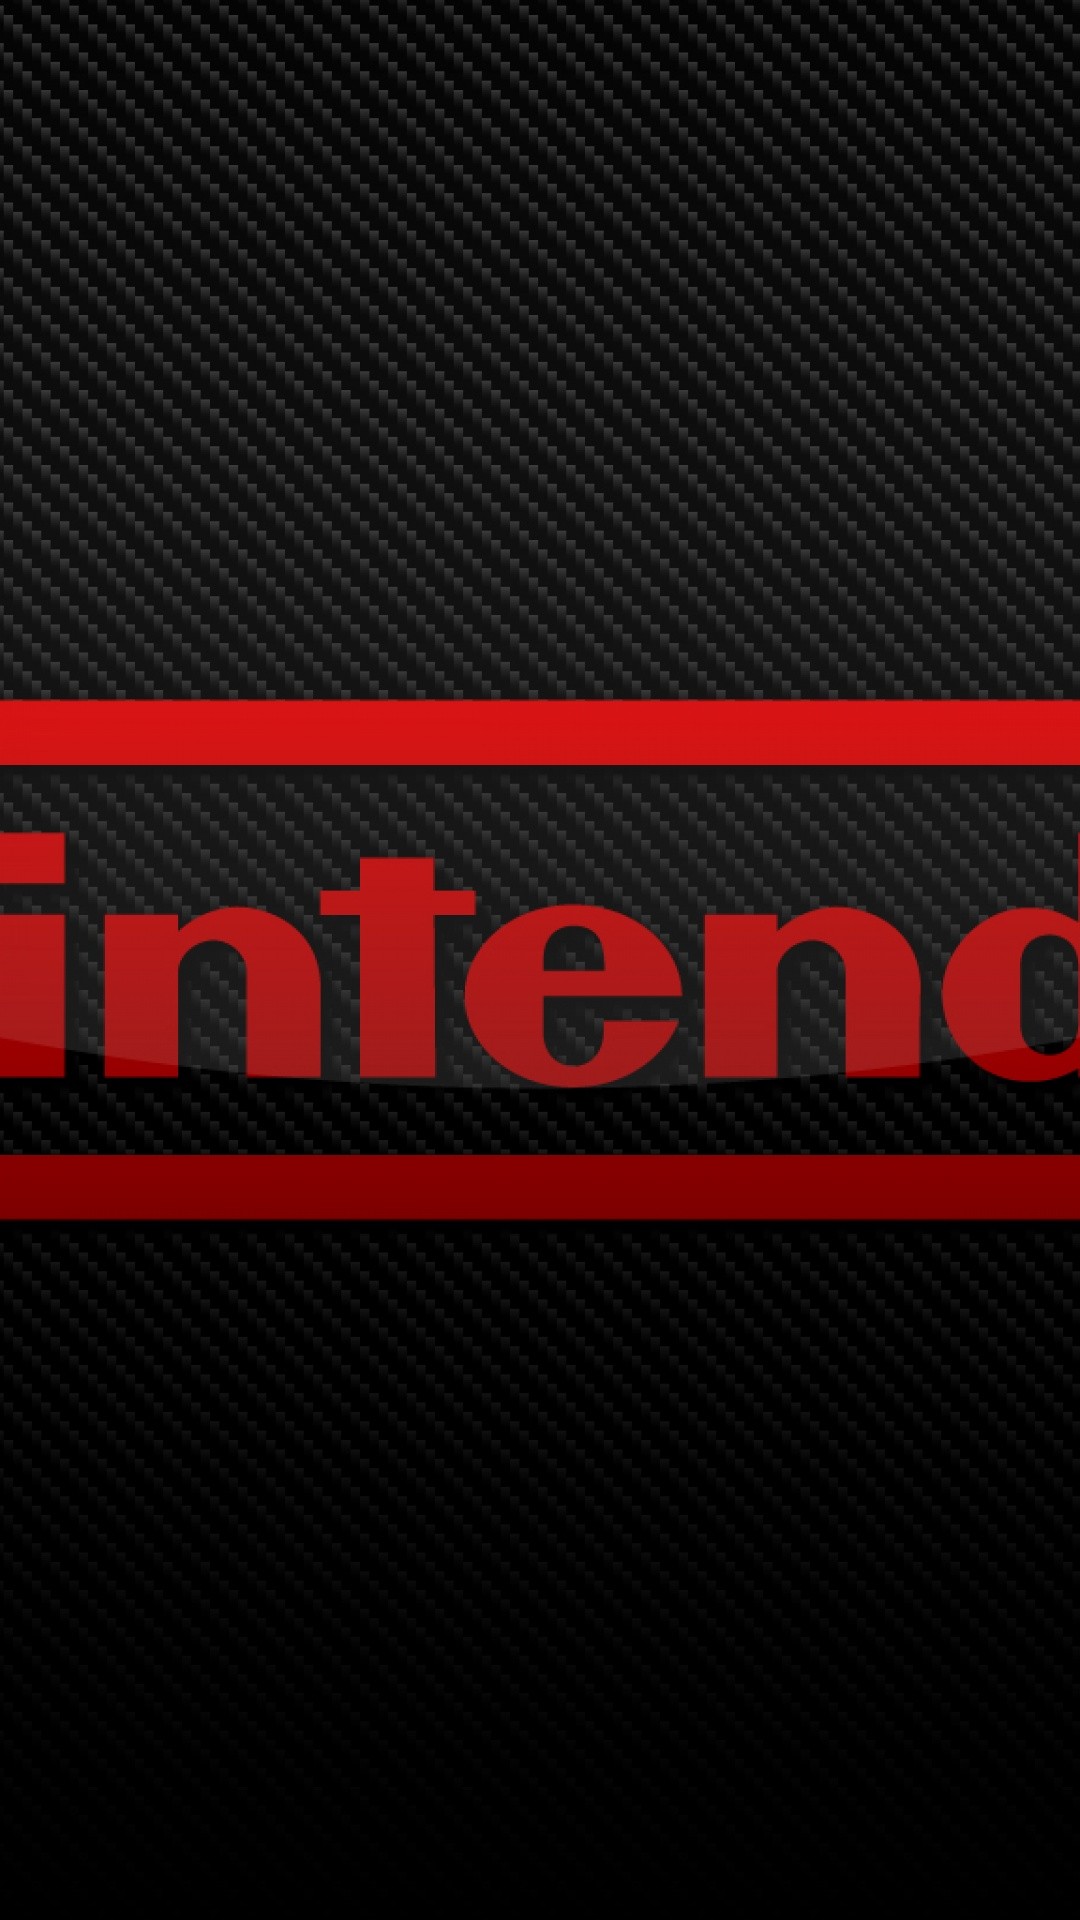 Nintendo Wallpapers iPhone by Steven Woodward #9